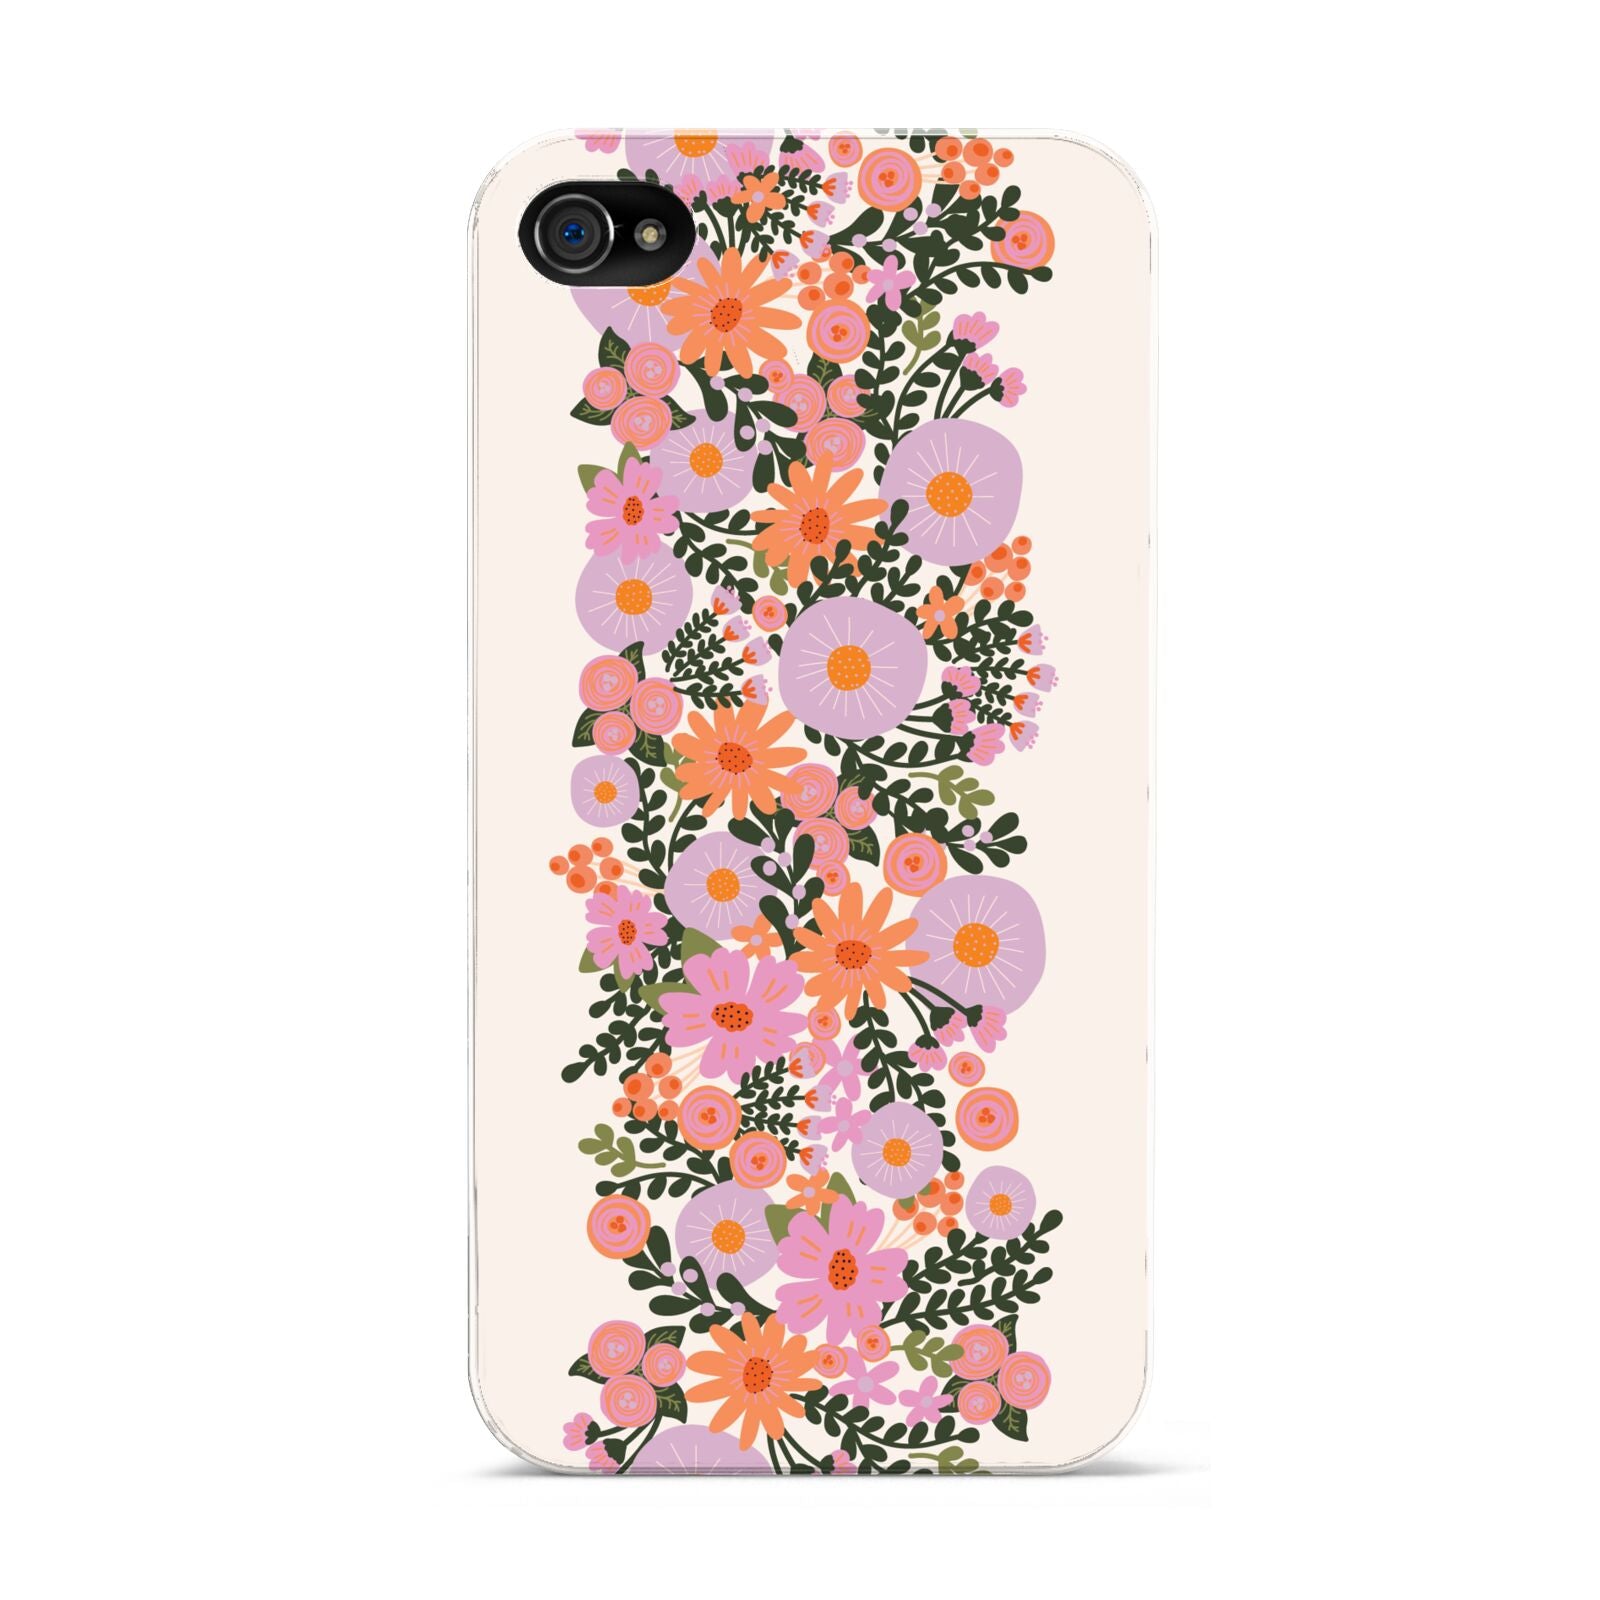 Floral Banner Pattern Apple iPhone 4s Case